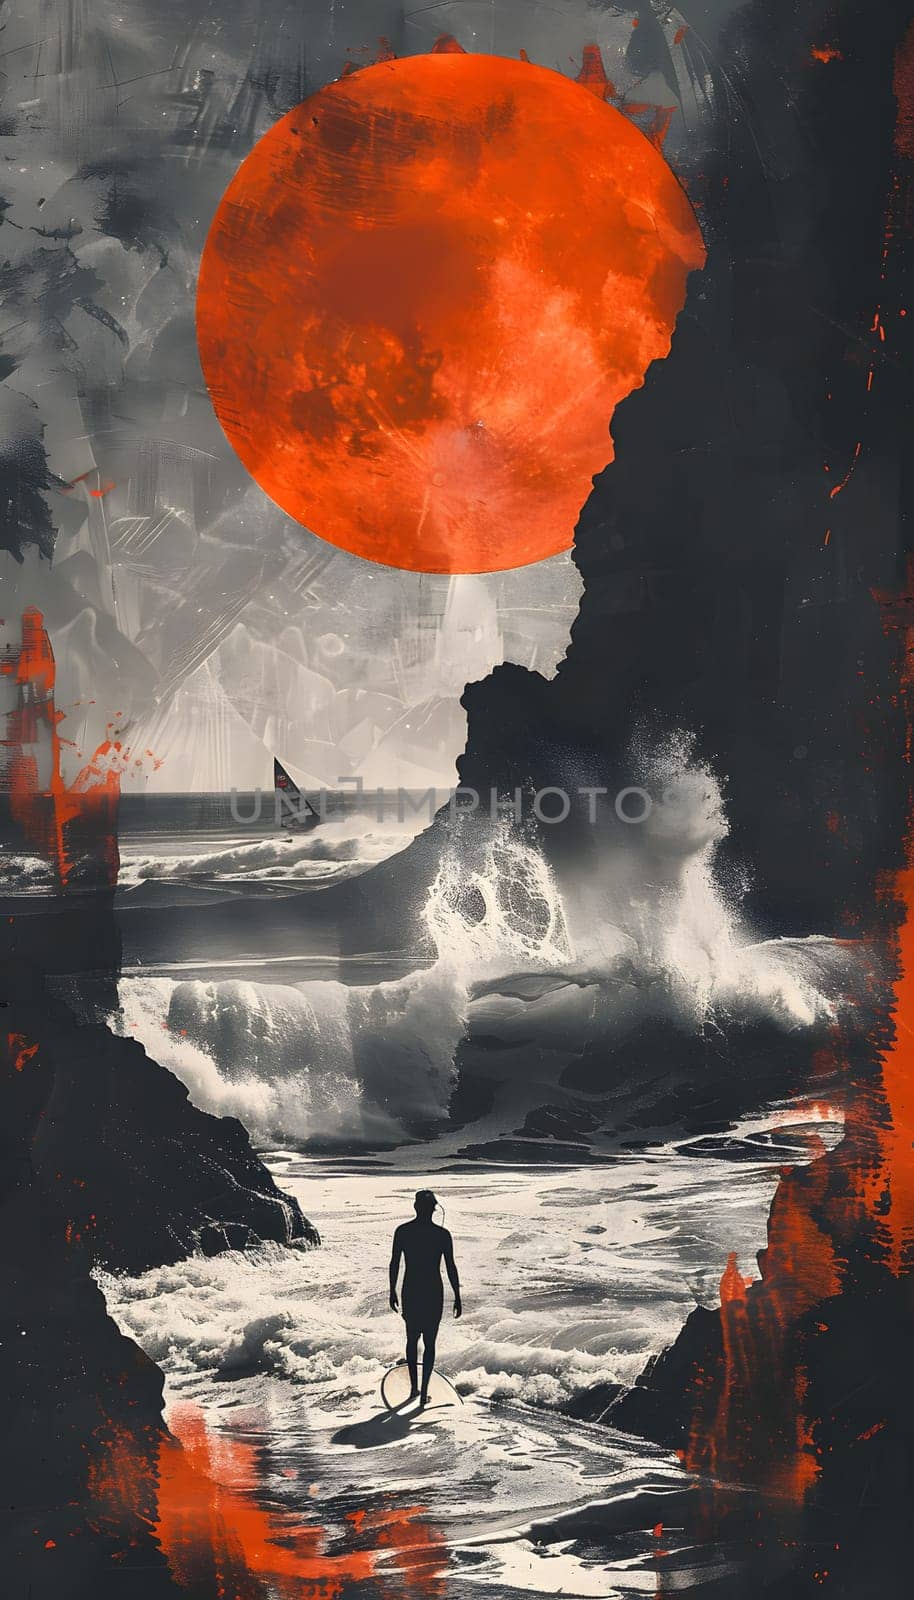 A man is strolling on the beach under the enchanting glow of a full moon, creating a picturesque scene reminiscent of a beautiful painting